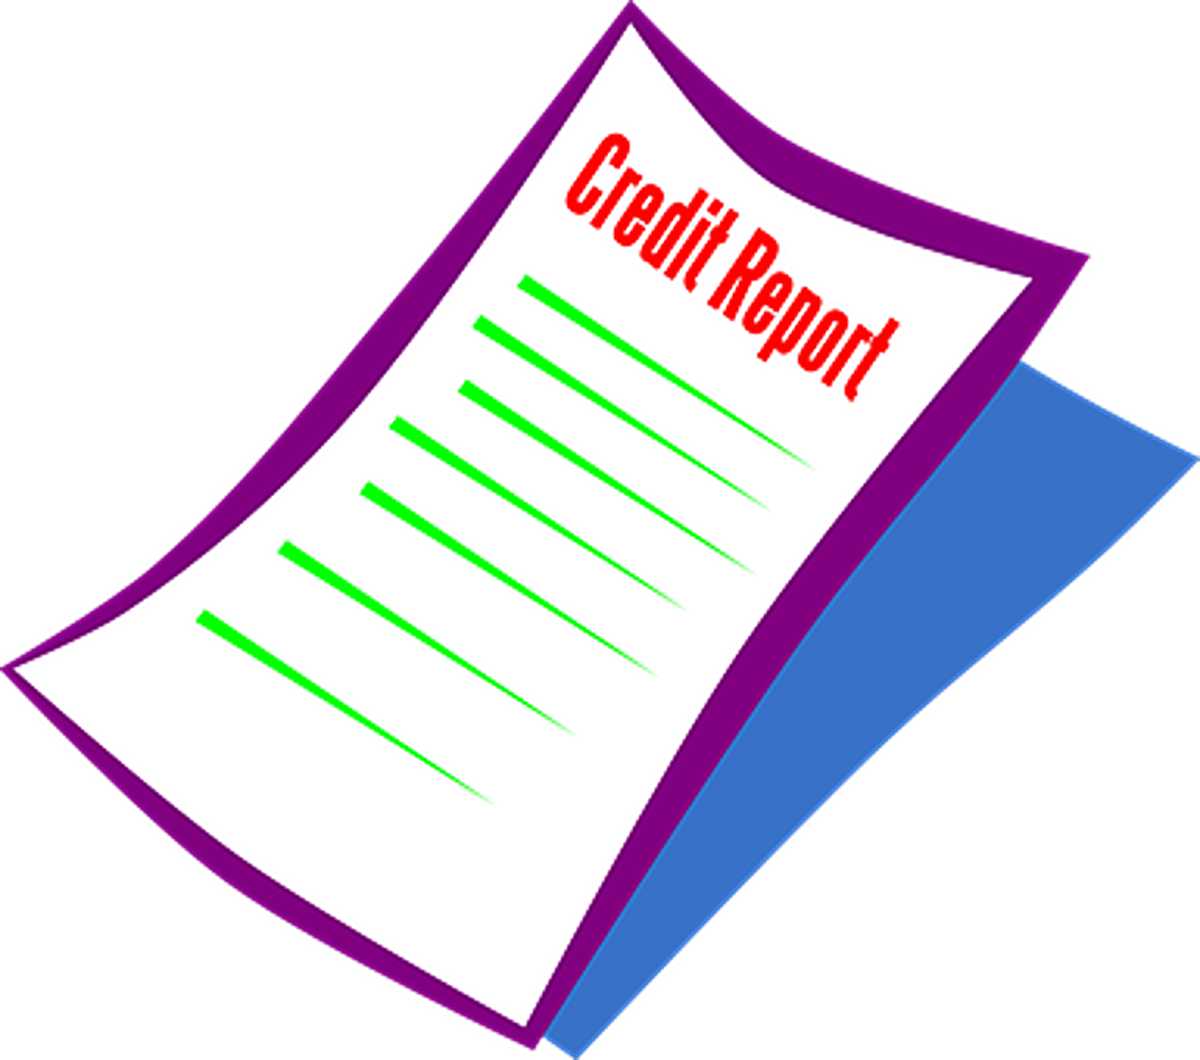 Maintain Your Credit Score